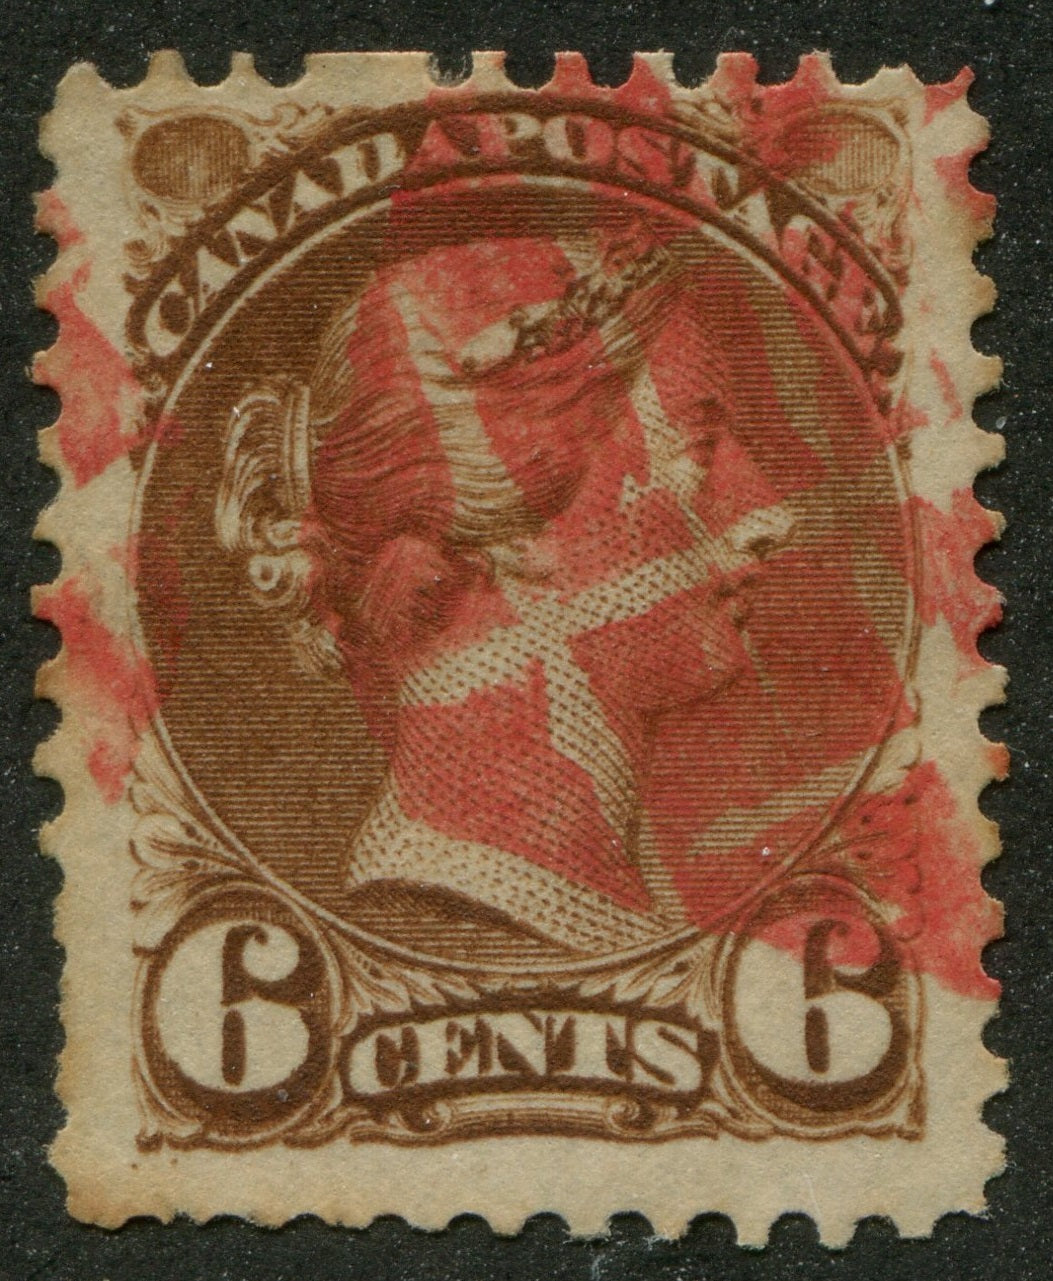 0039CA2305 - Canada #39d - Used, Major Re-Entry